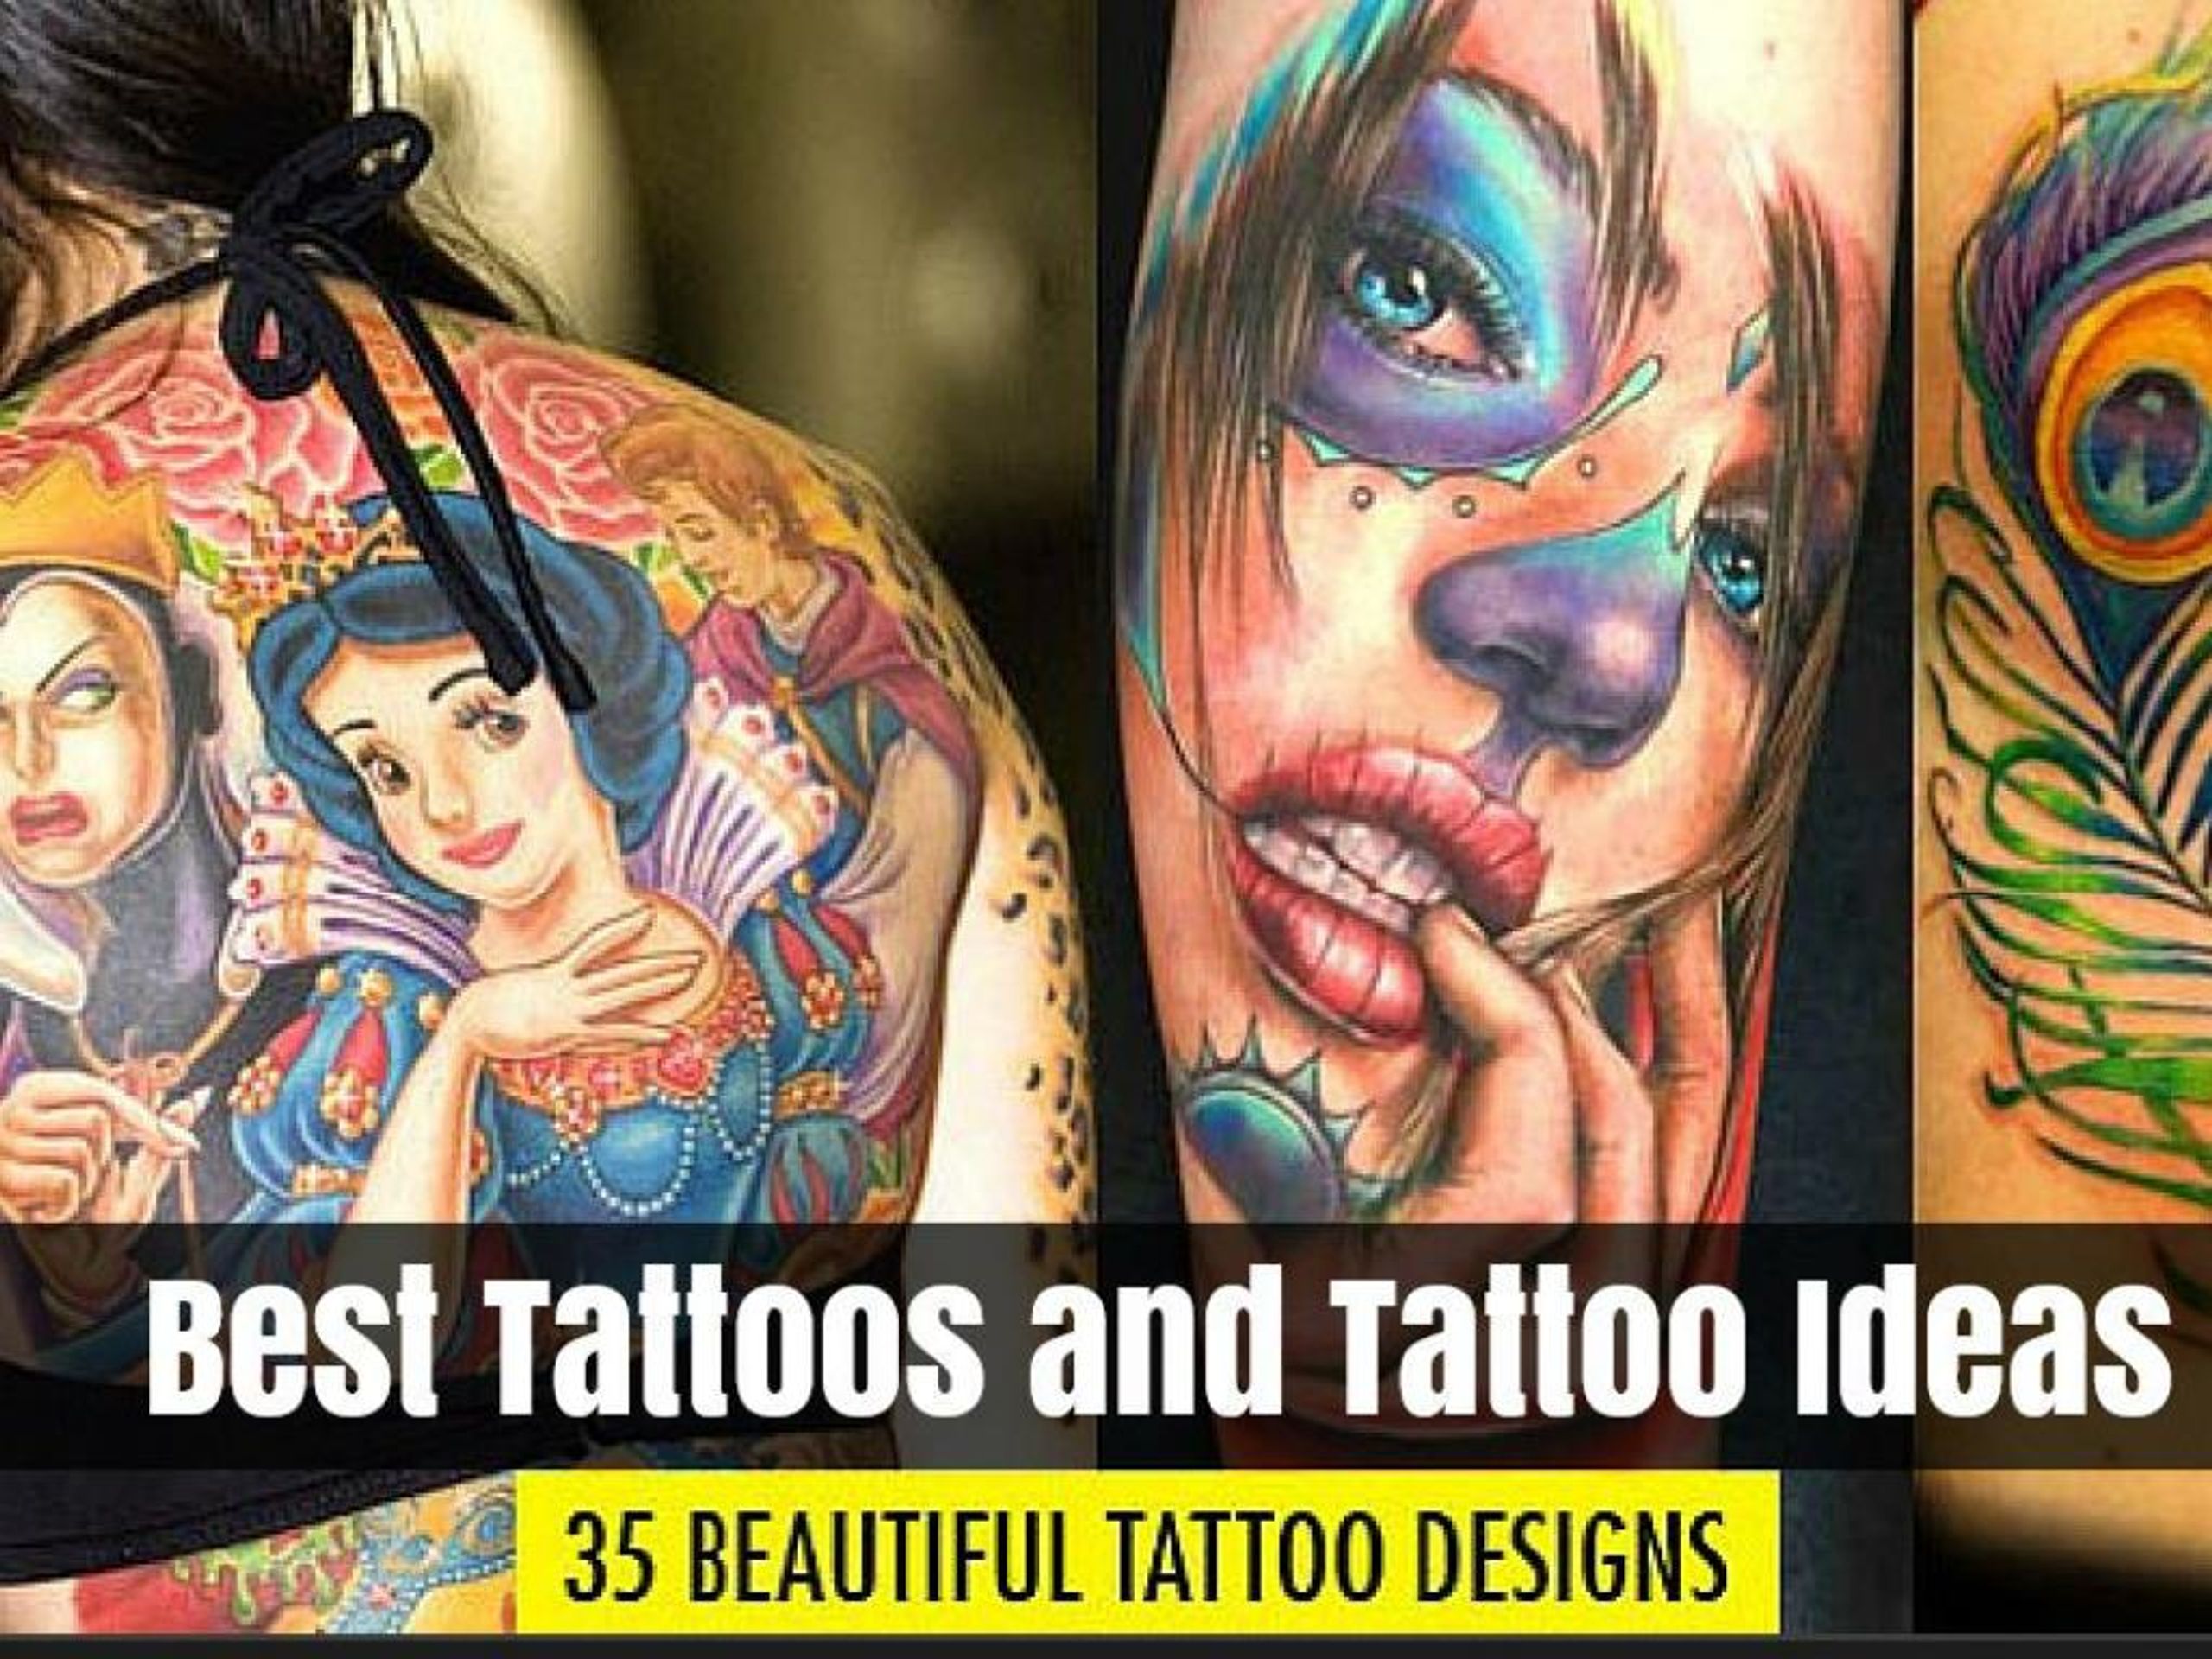 New] The 10 Best Tattoo Ideas Today (with Pictures) - Via  @richie_moreno_tattoo --------------------------------- FO… | Tattoo  designs, Cool tattoos, Money tattoo